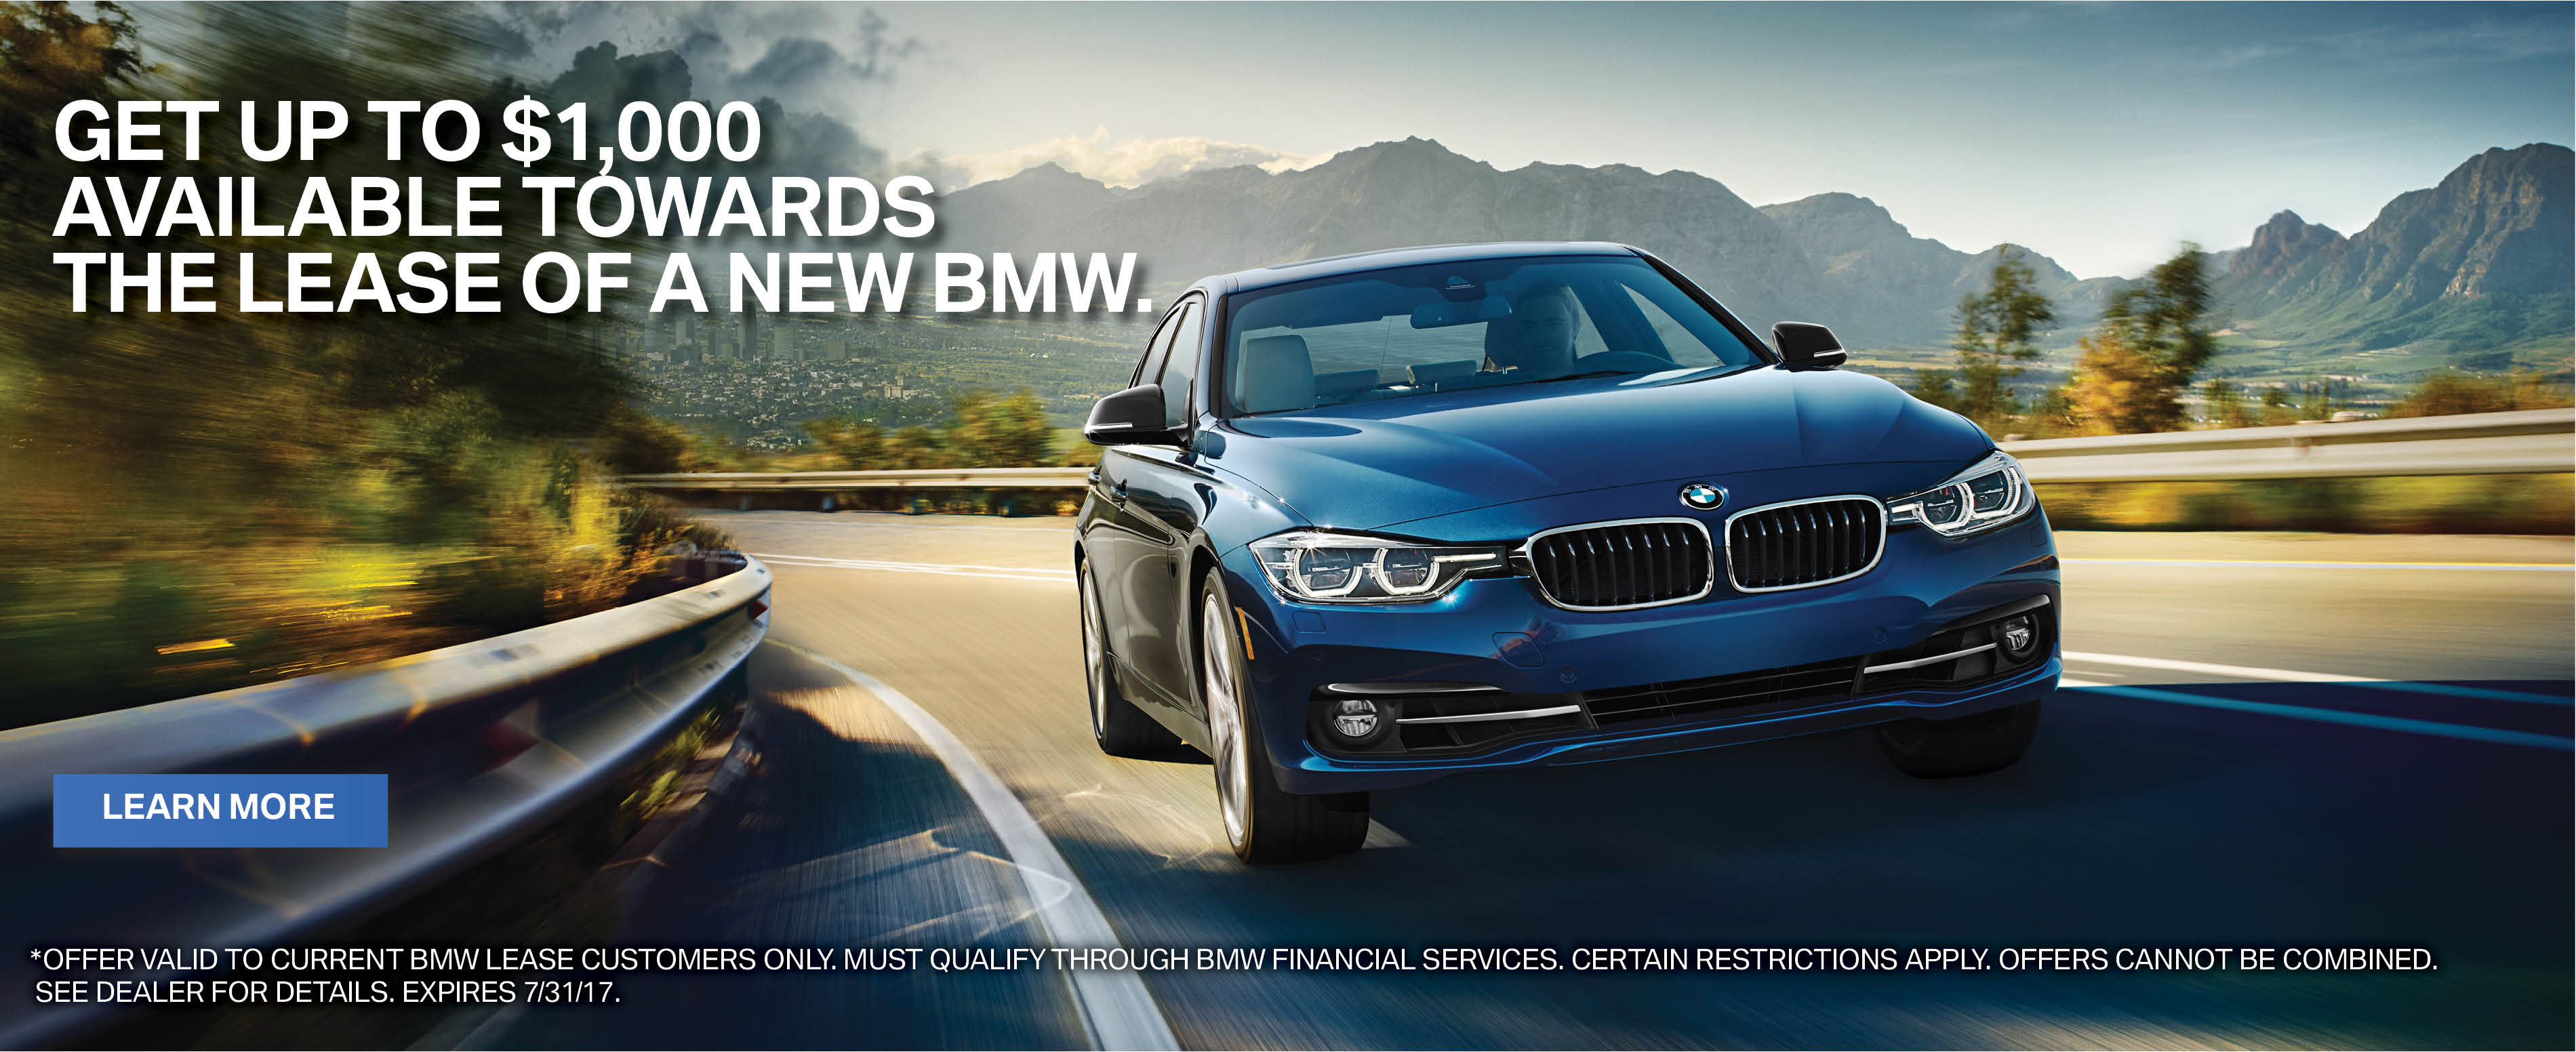 bmw-financial-services-lease-loyalty-promotion-patrick-bmw